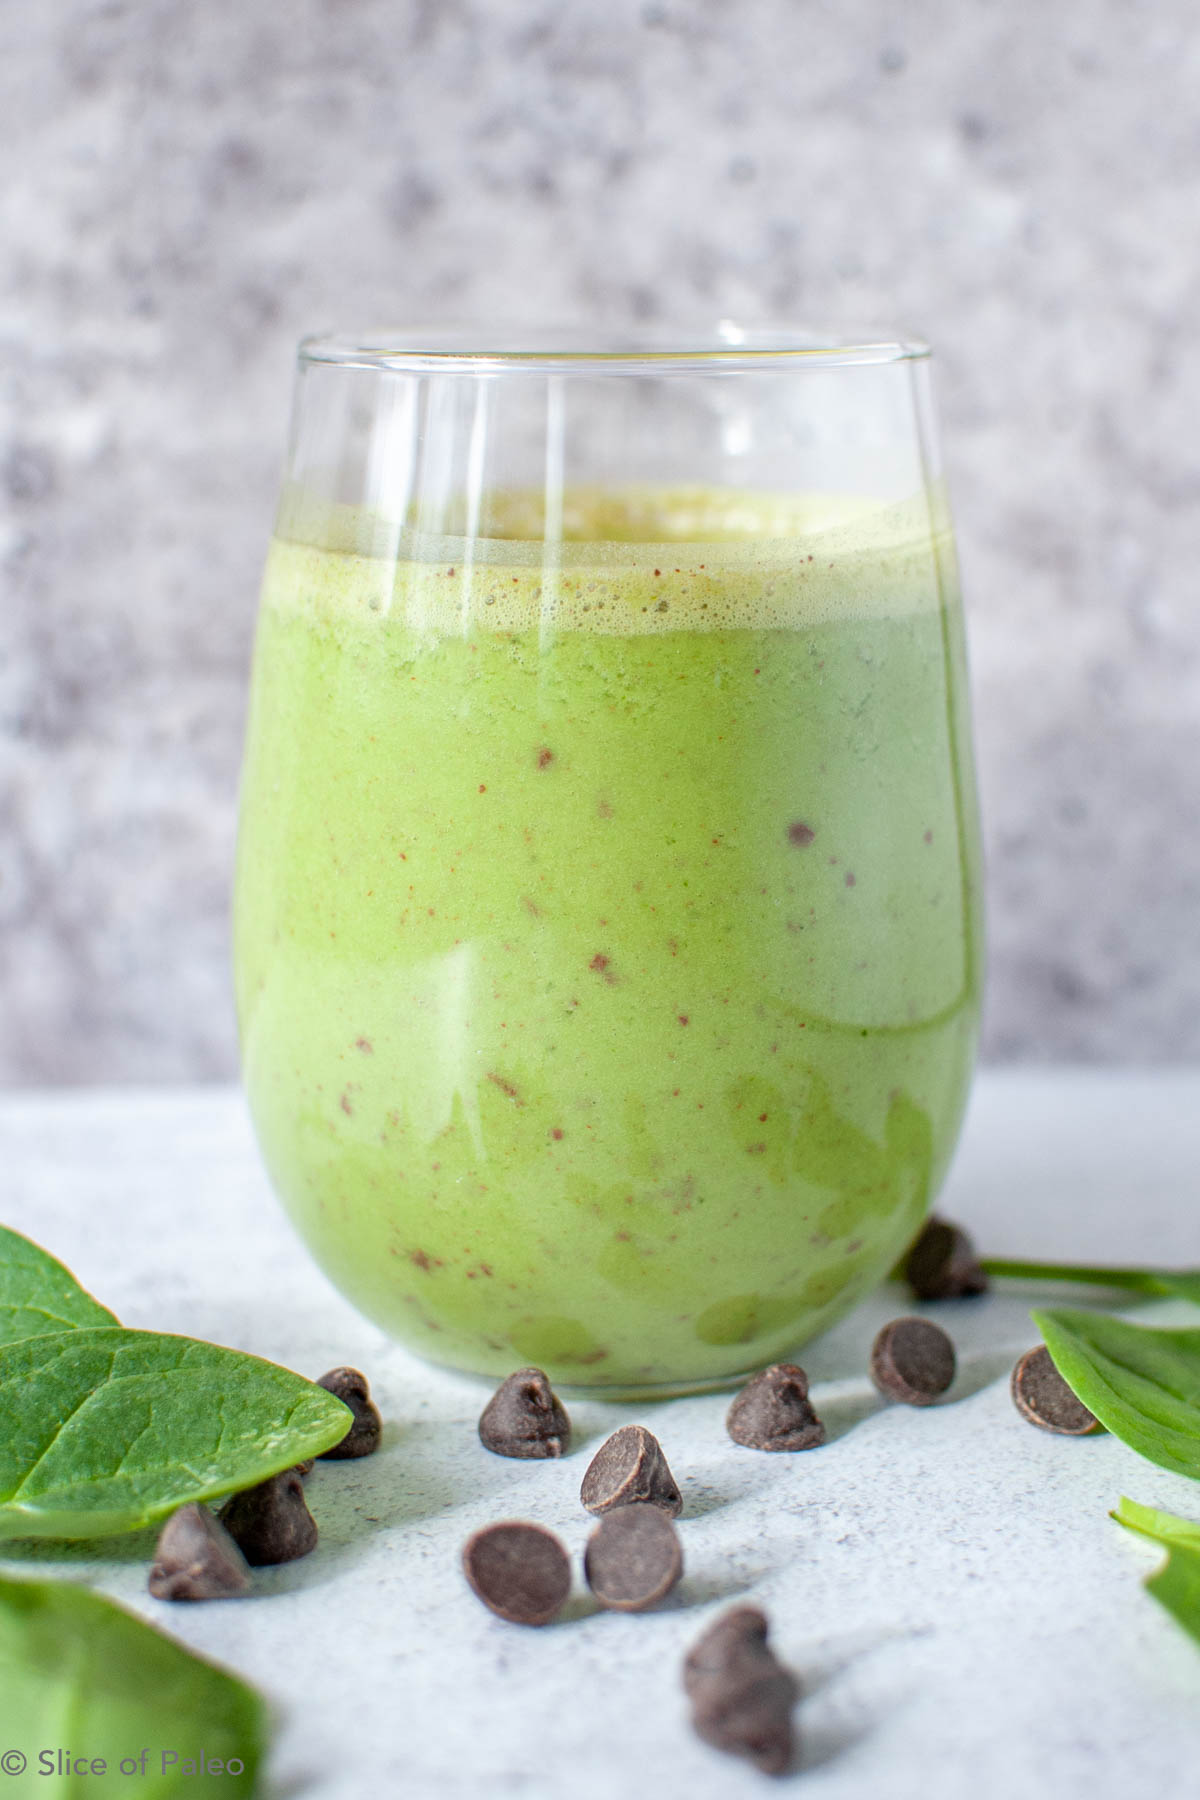 Paleo Shamrock shake in a tumbler shown with chocolate chips and spinach